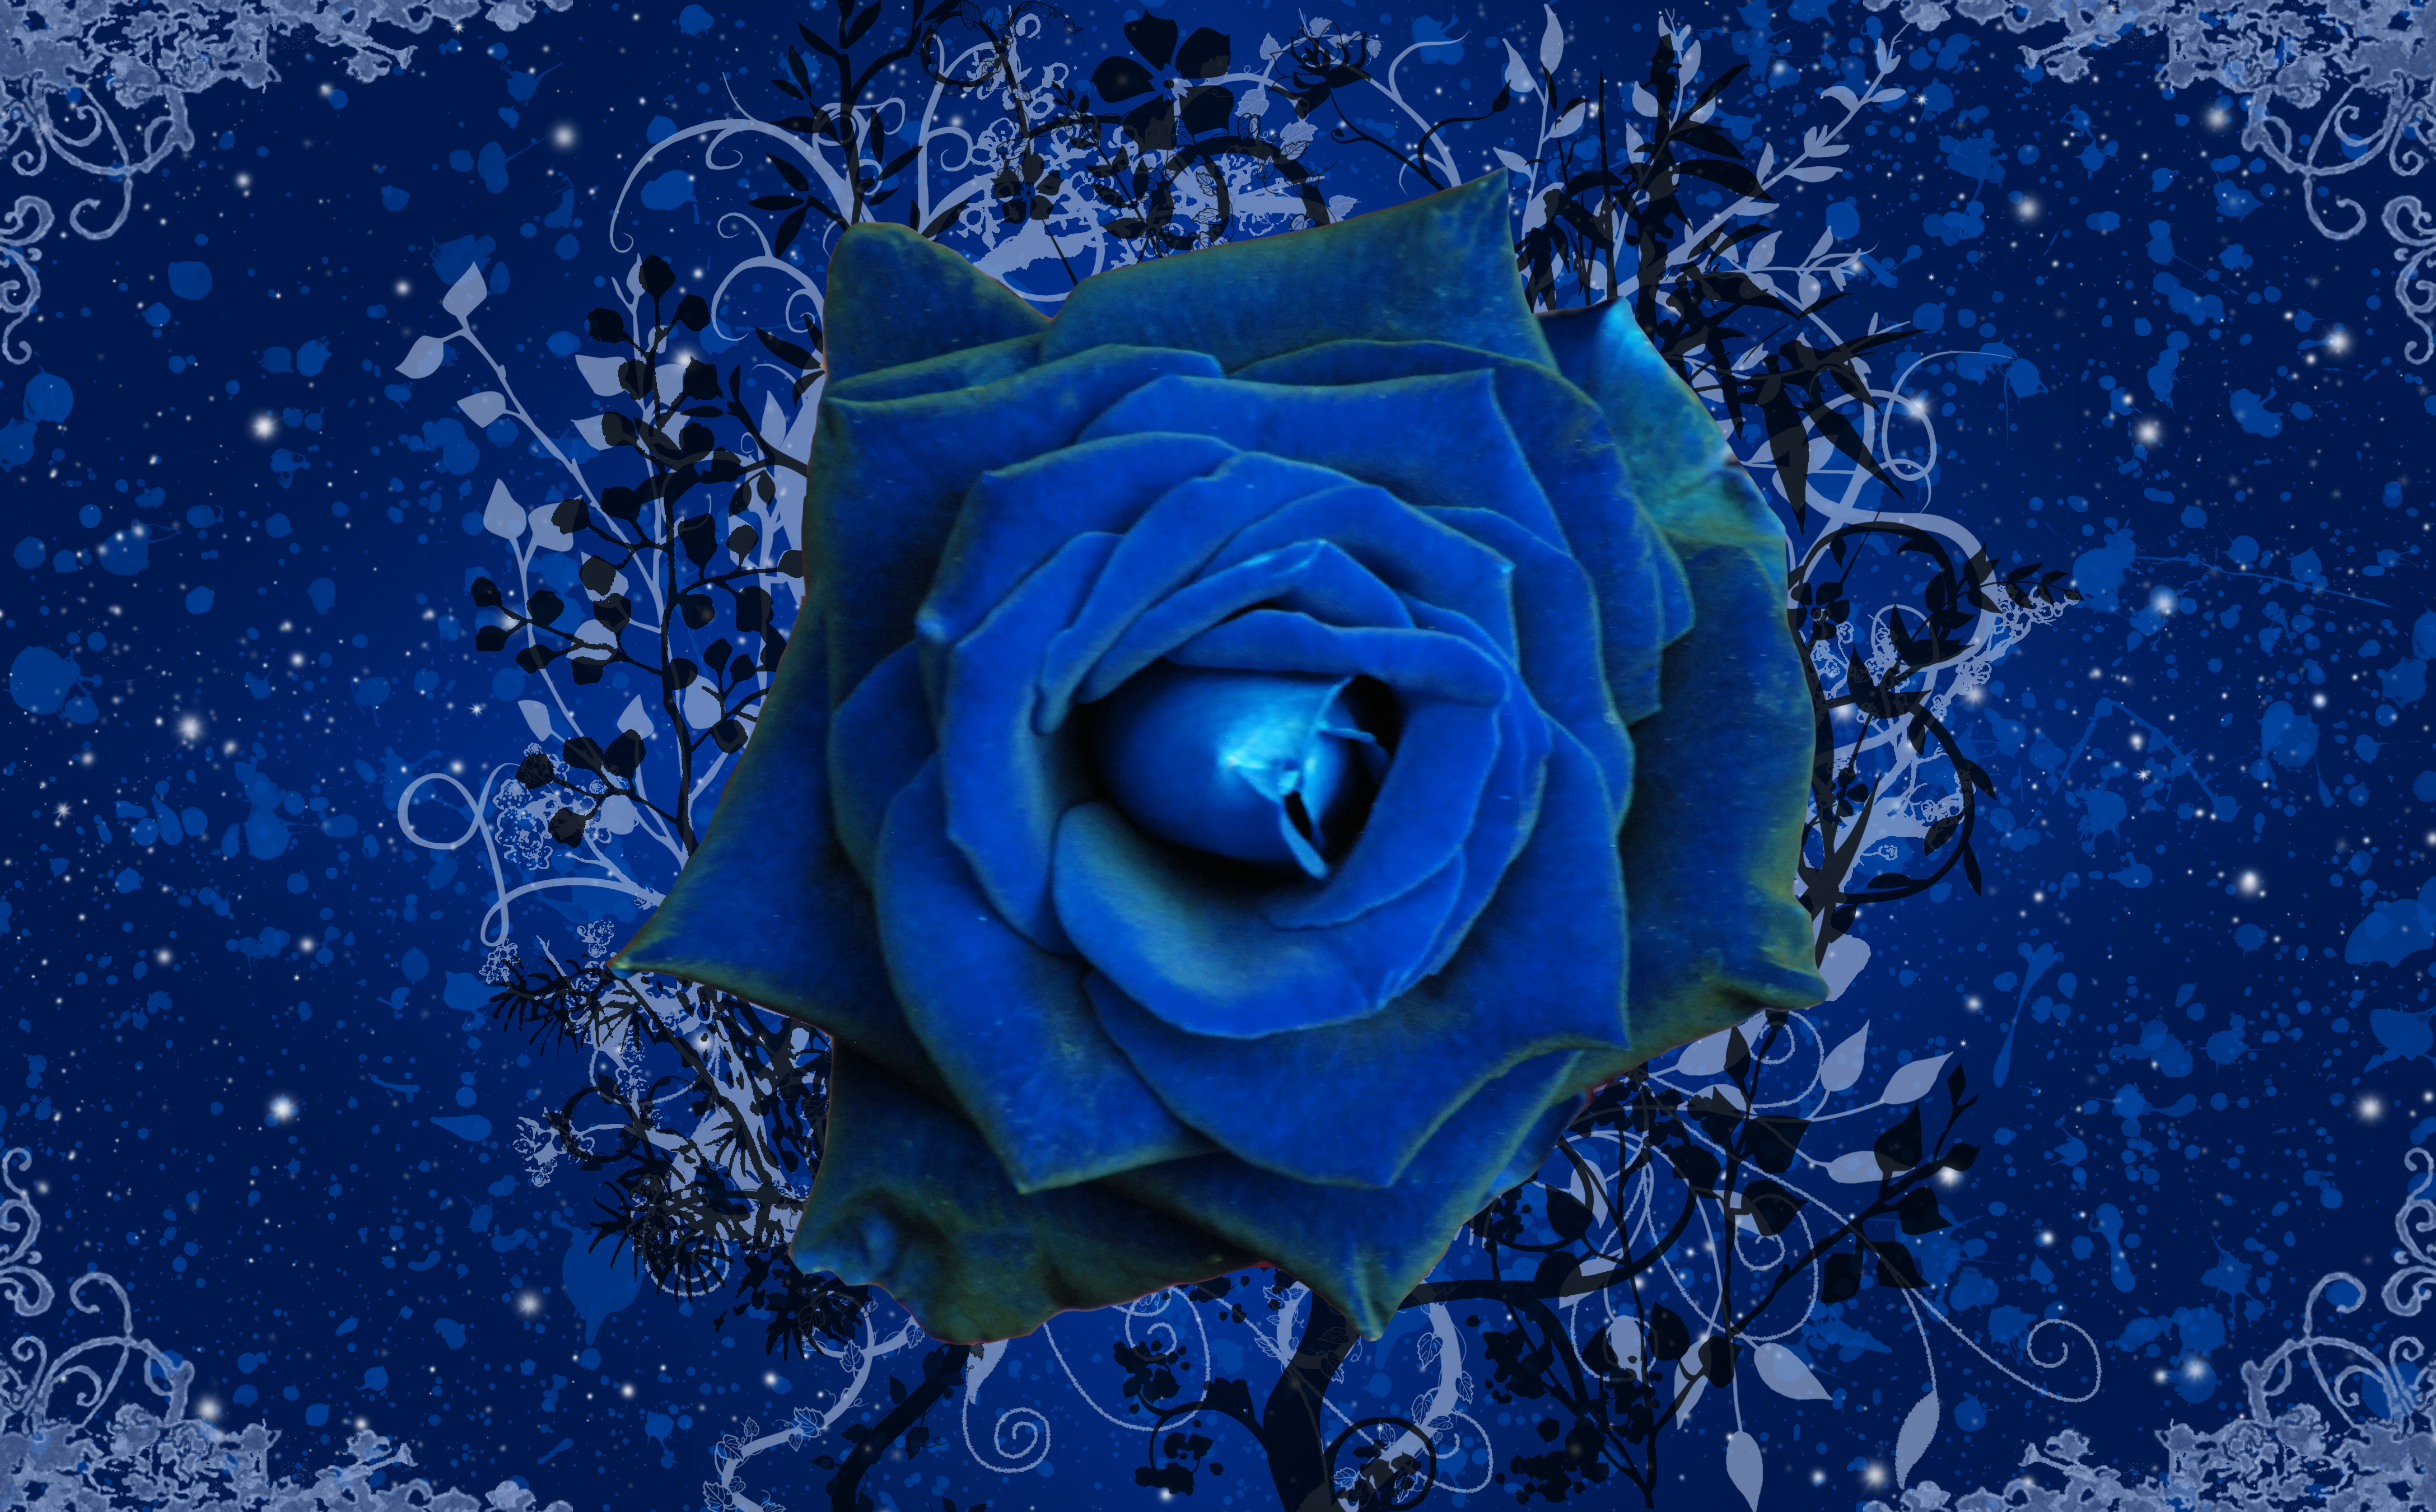 Blue Rose Wallpaper Gallery Yopriceville High Quality Image